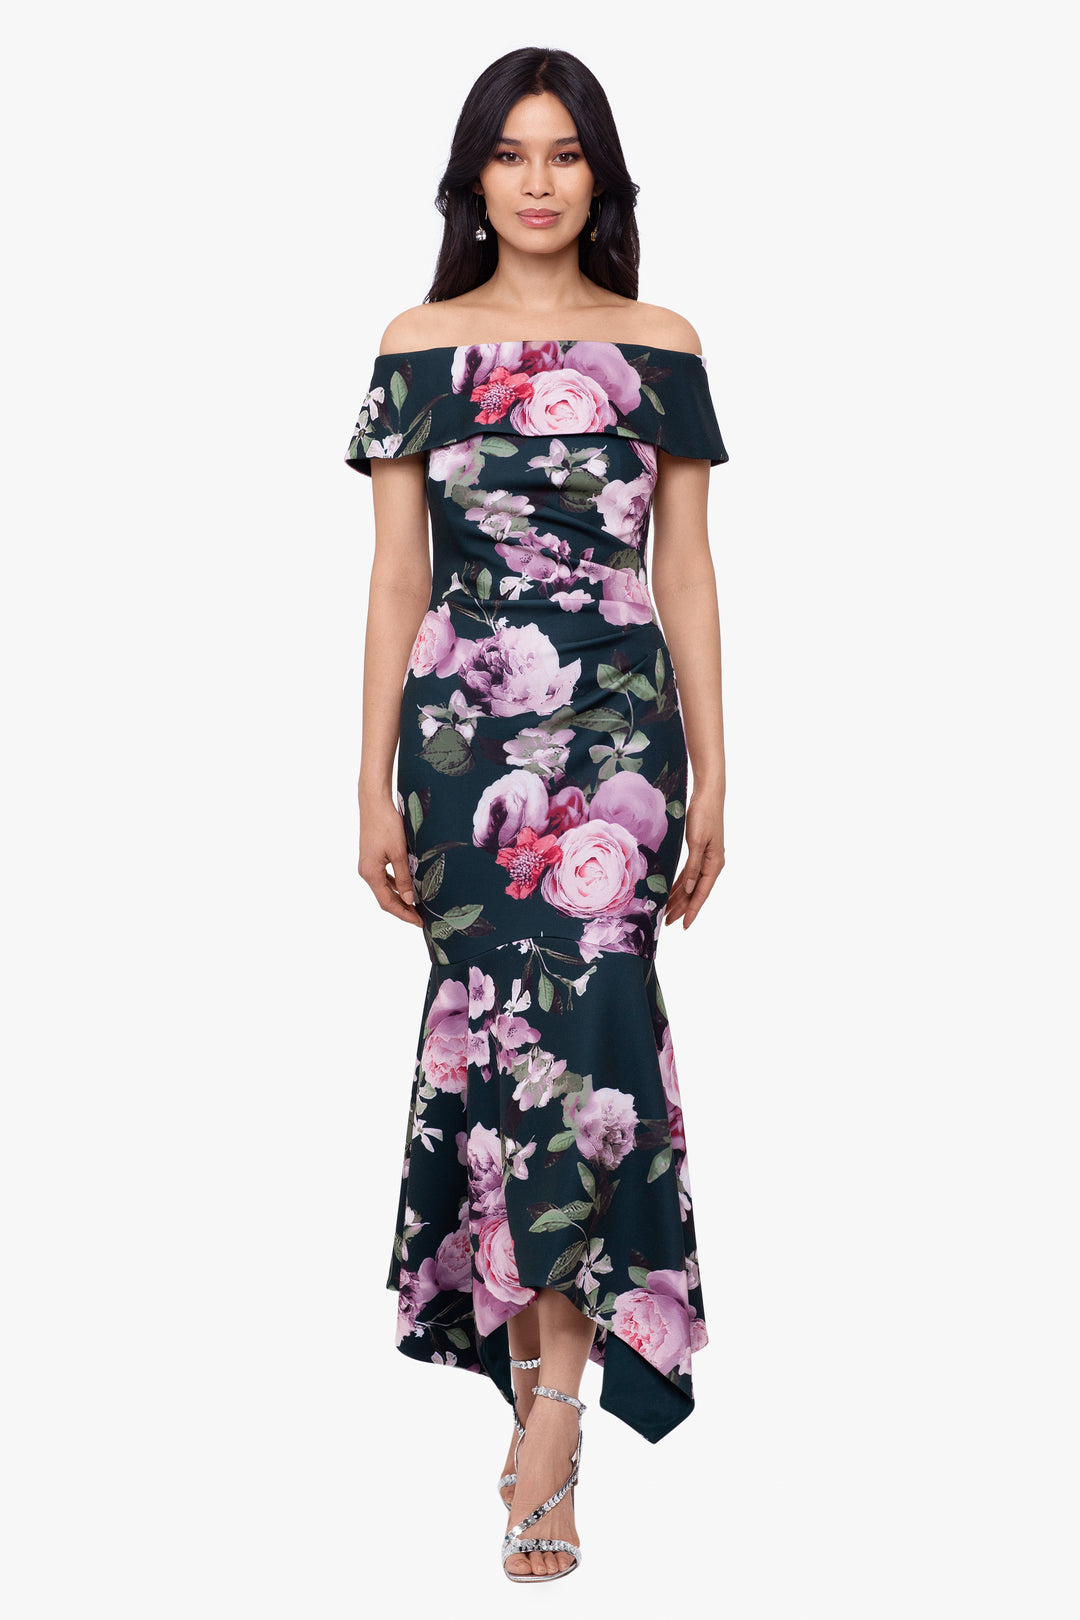 "Fiona" Midi Off The Shoulder Floral Printed Dress